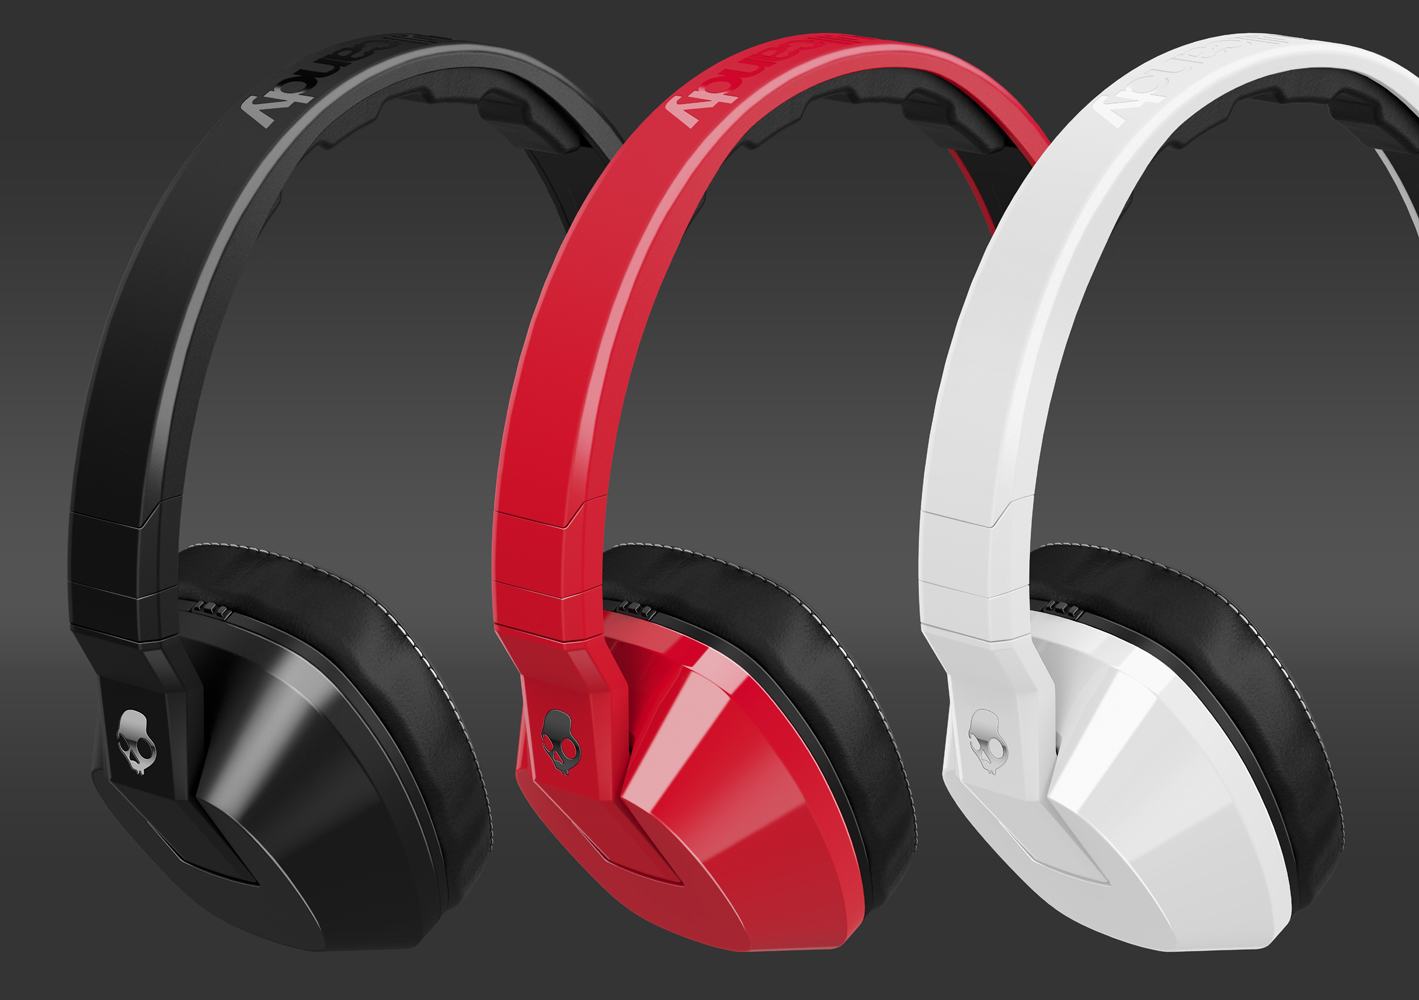 Experience the Power of Bass with the Skullcandy Crusher 2014 Headphones